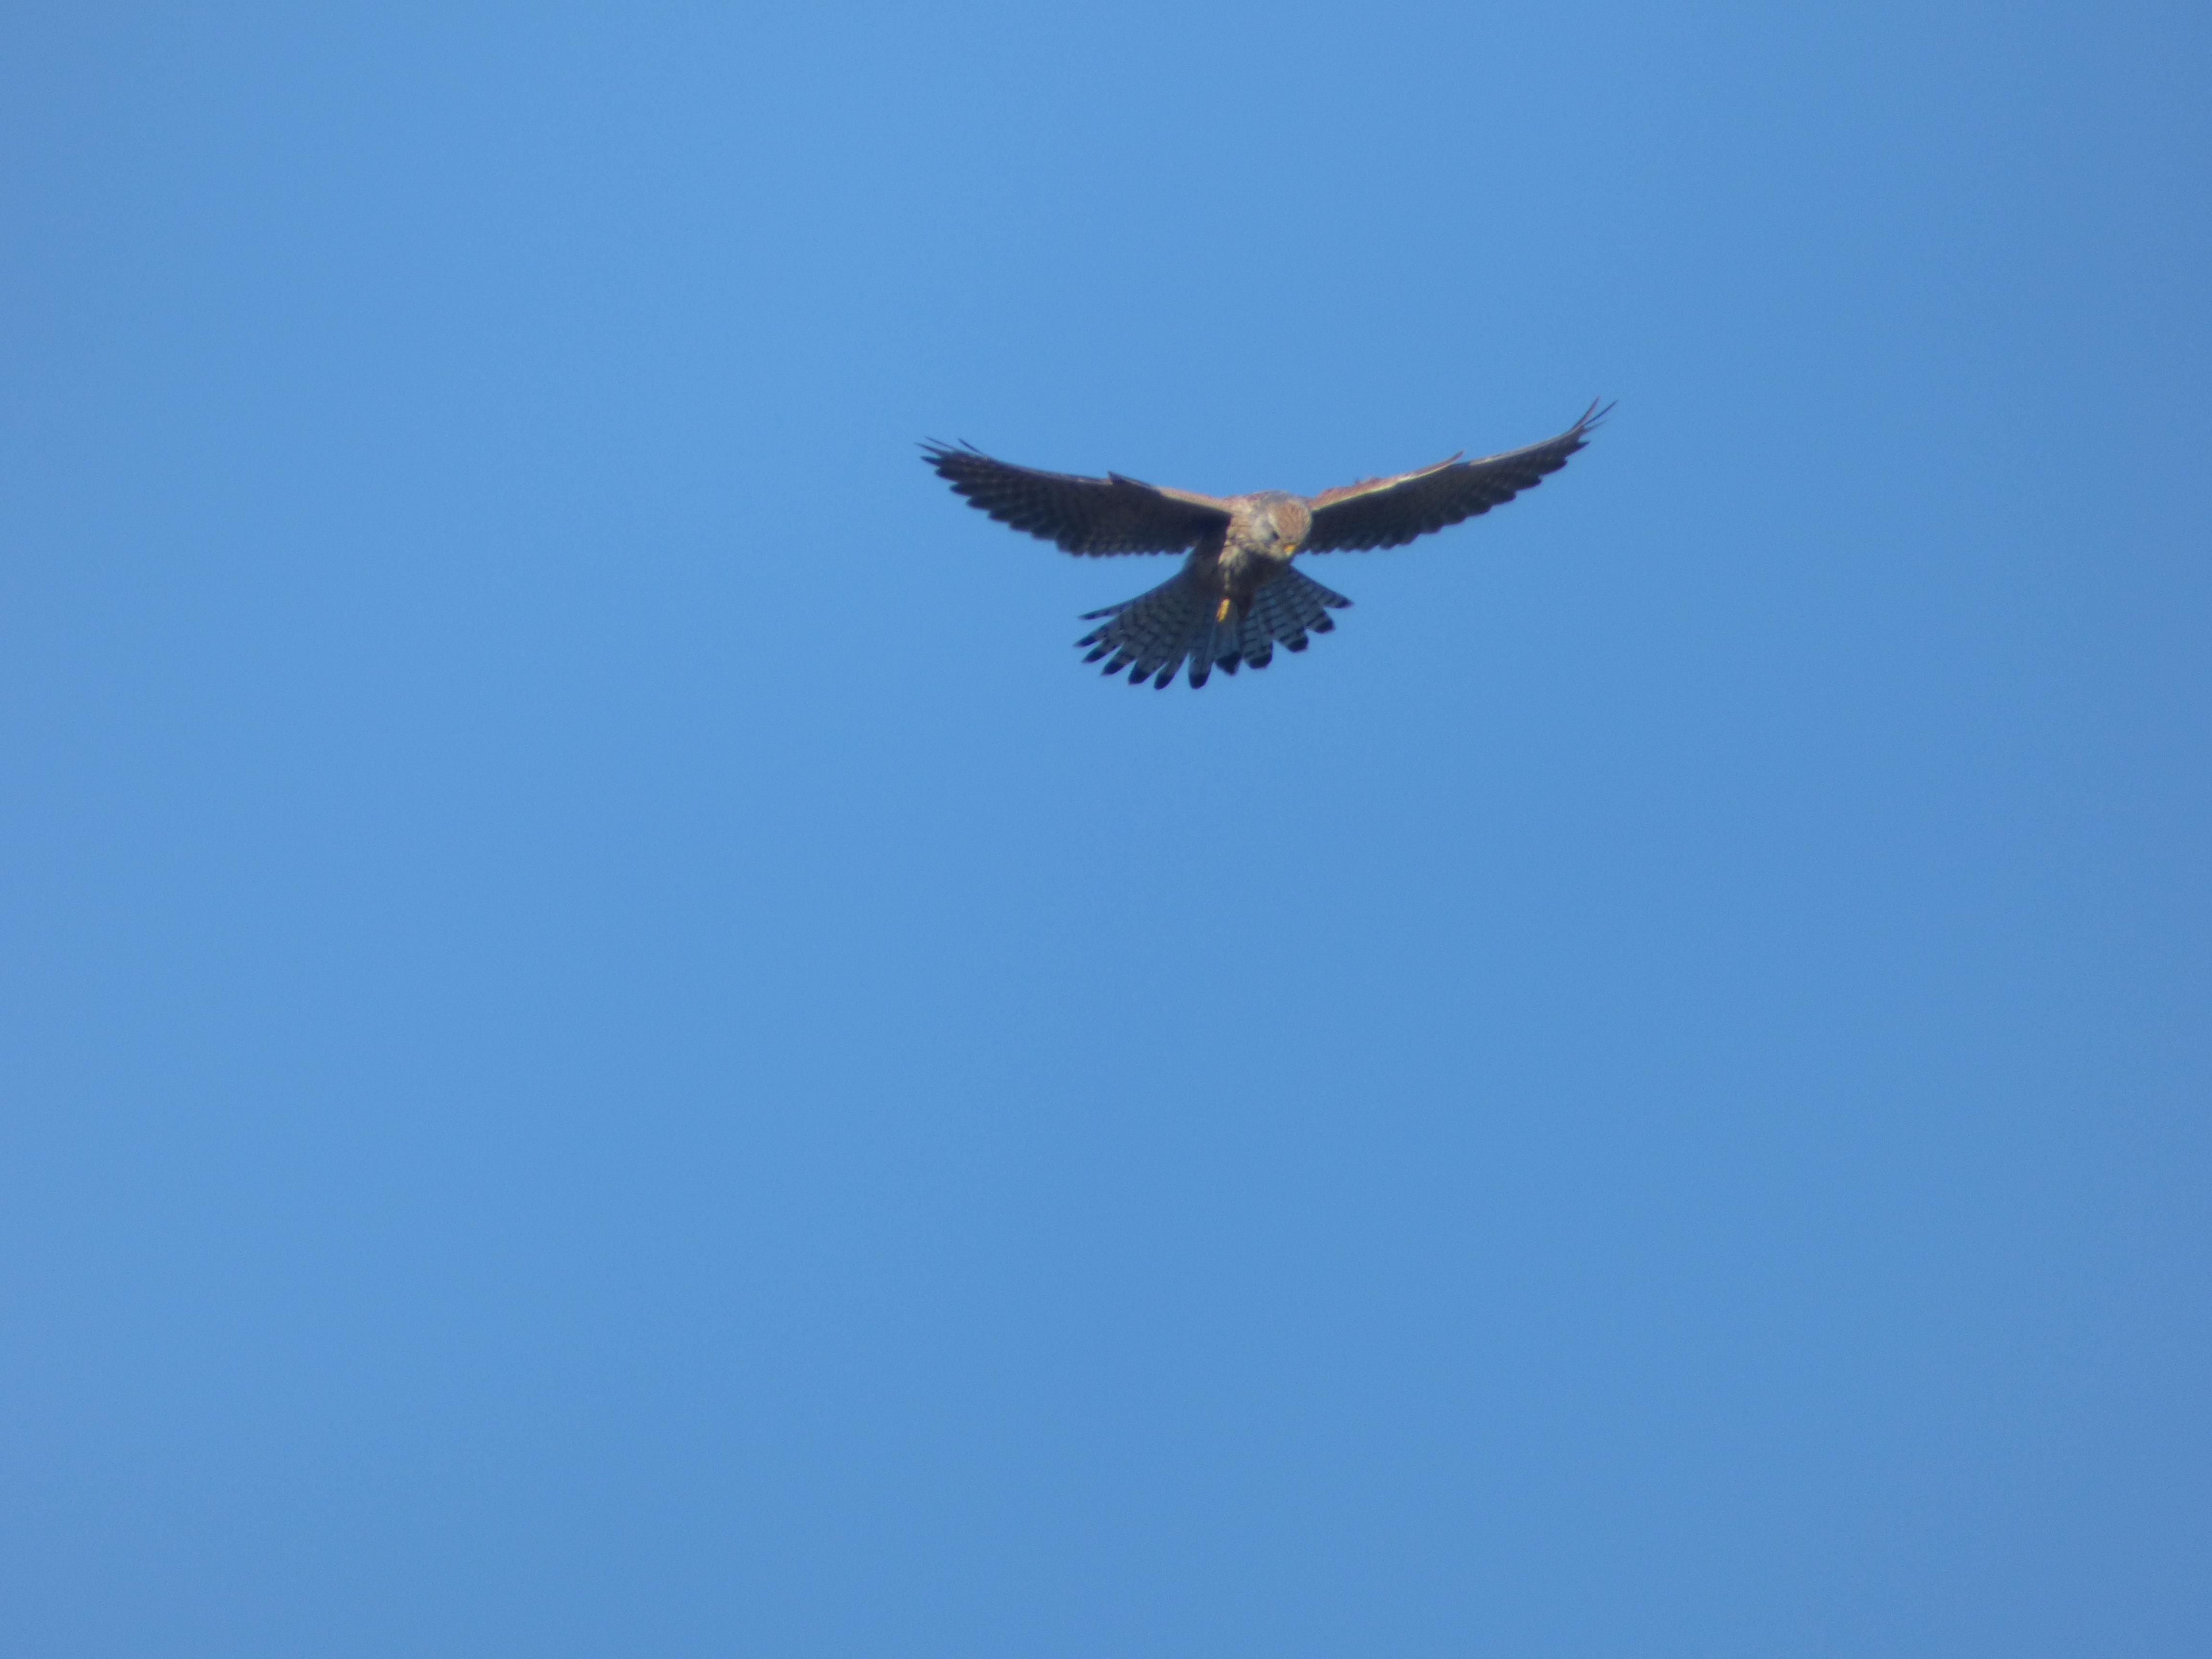 Ireland] This guy was soaring high above, no flapping, a of bird of prey?  I've seen a buzzard in this area, but this kind of looks more like a  sparrowhawk to me?